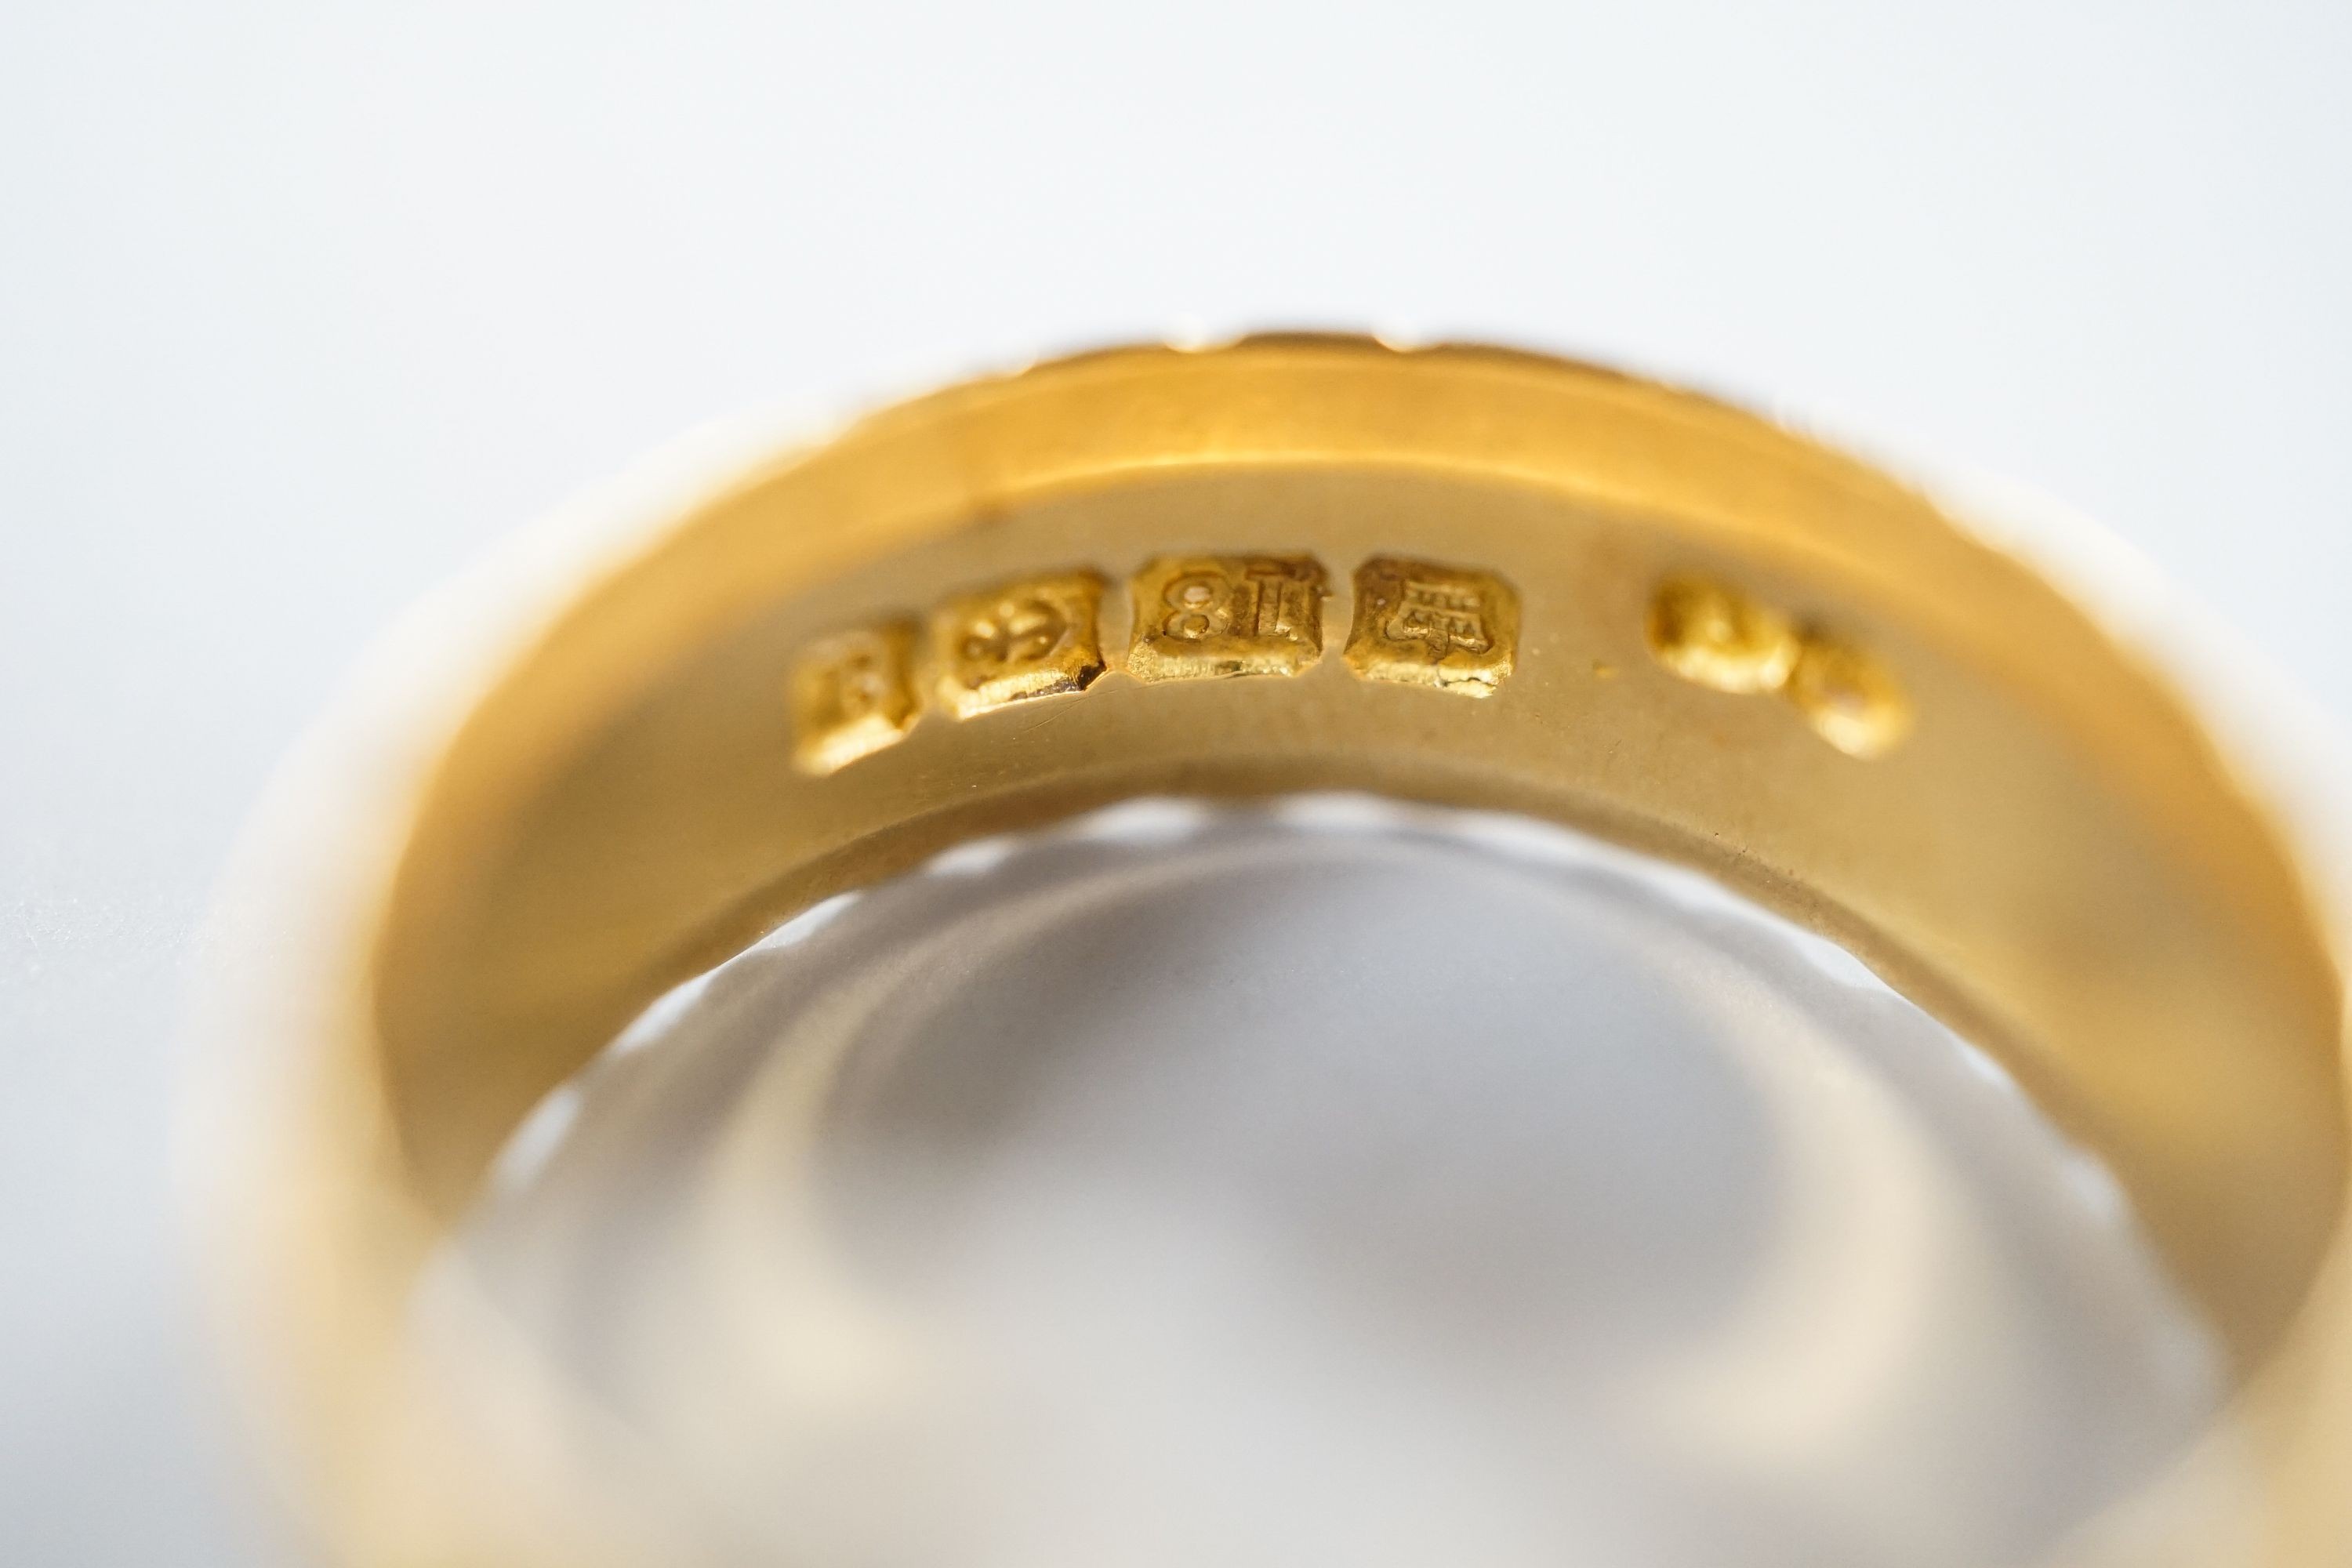 A late Victorian engraved 18ct gold wedding band, Birmingham, 1900, size Q, 6.7 grams.